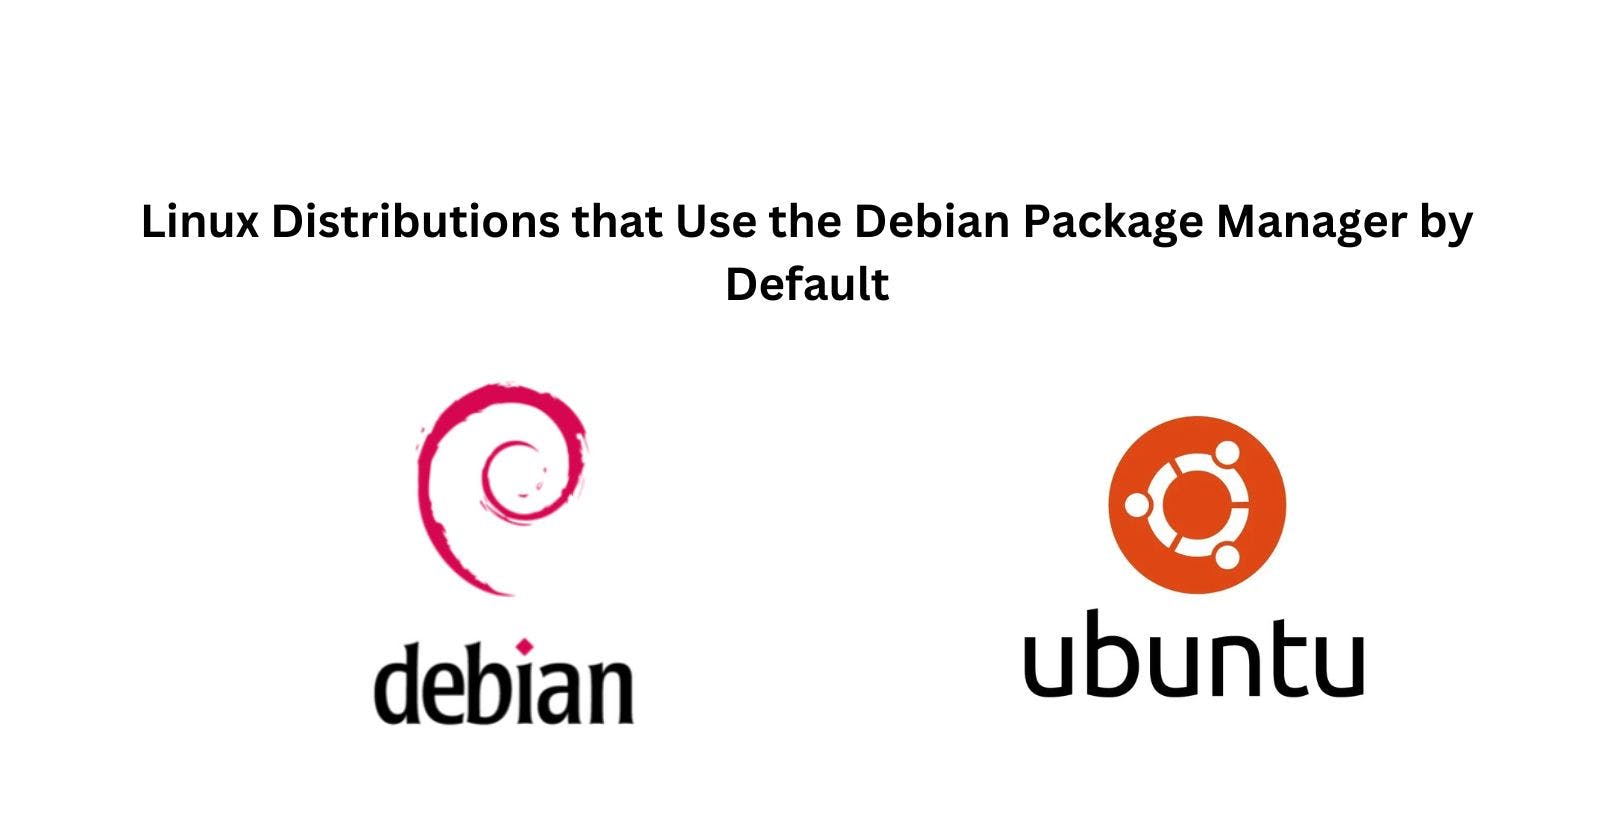 Linux Distributions that Use the Debian Package Manager by Default